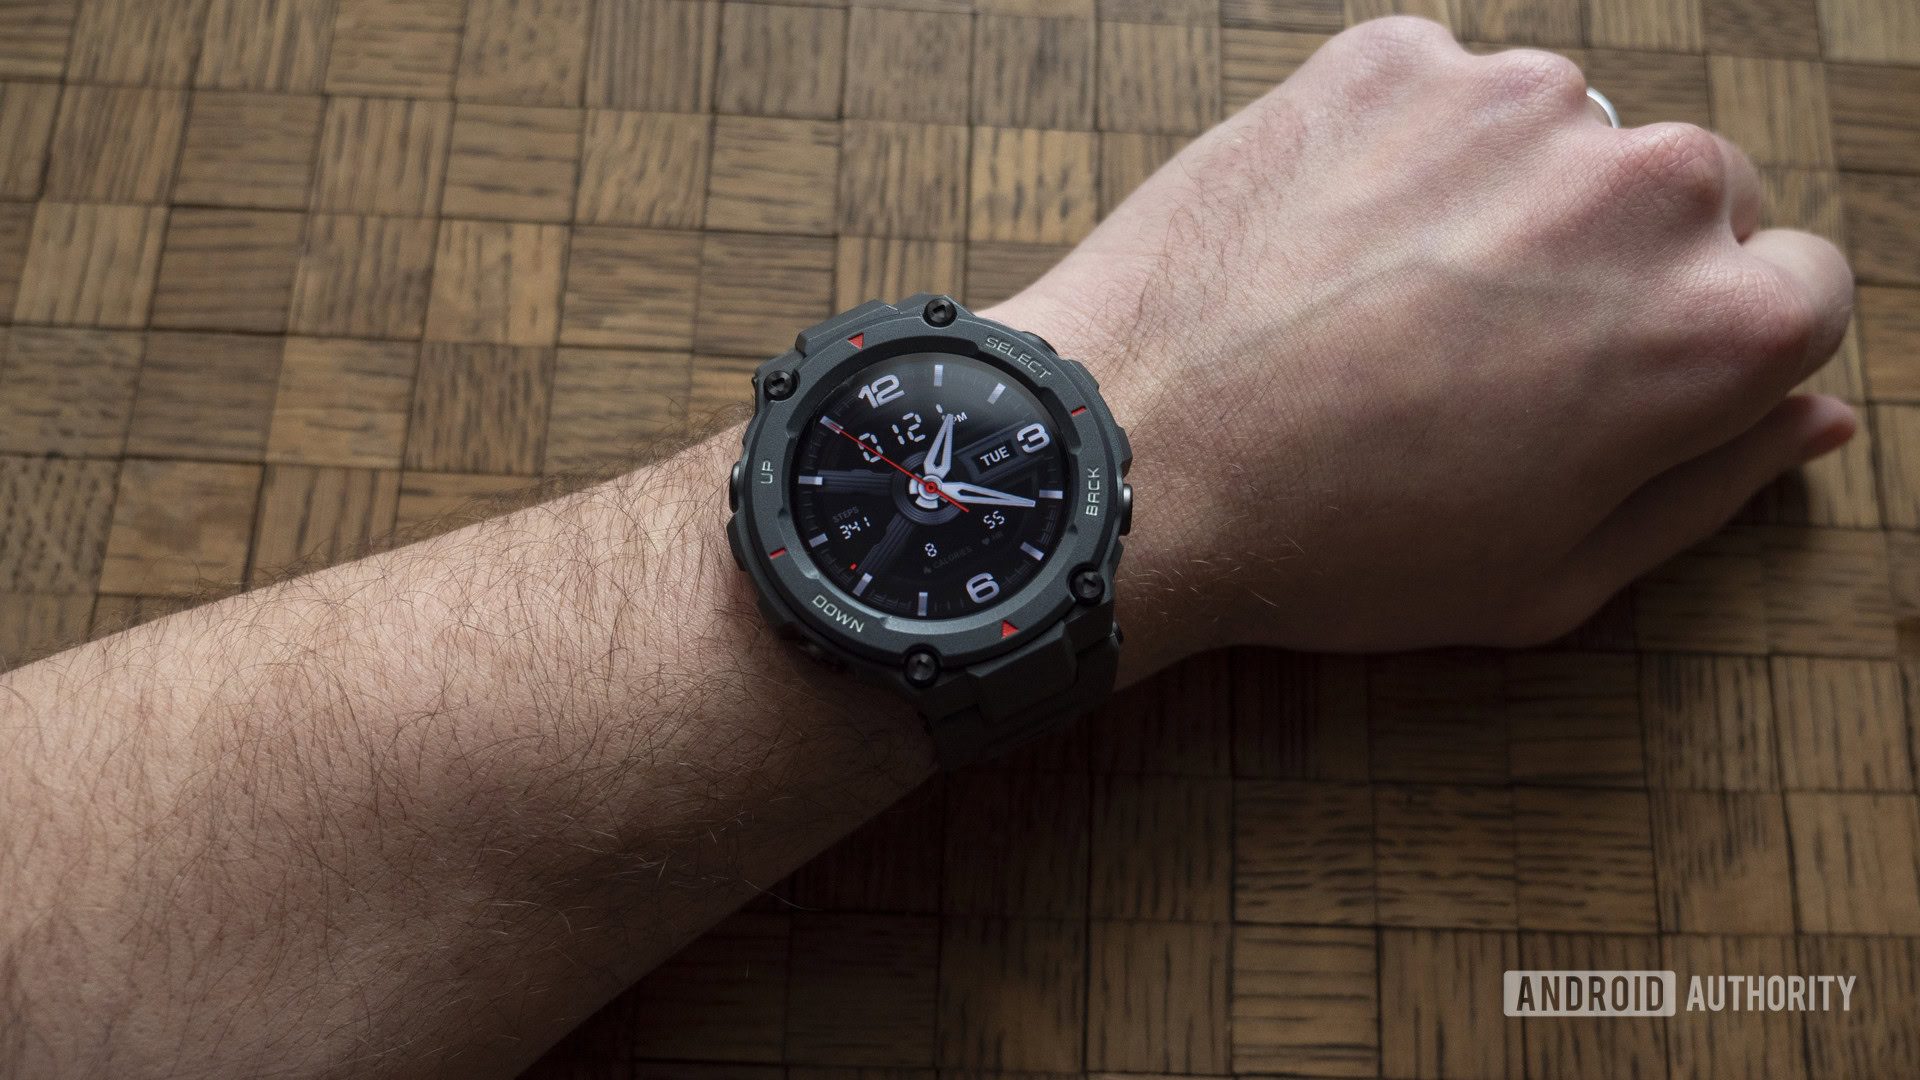 Amazfit T Rex Pro VS Amazfit Stratos 3 which one is better and why